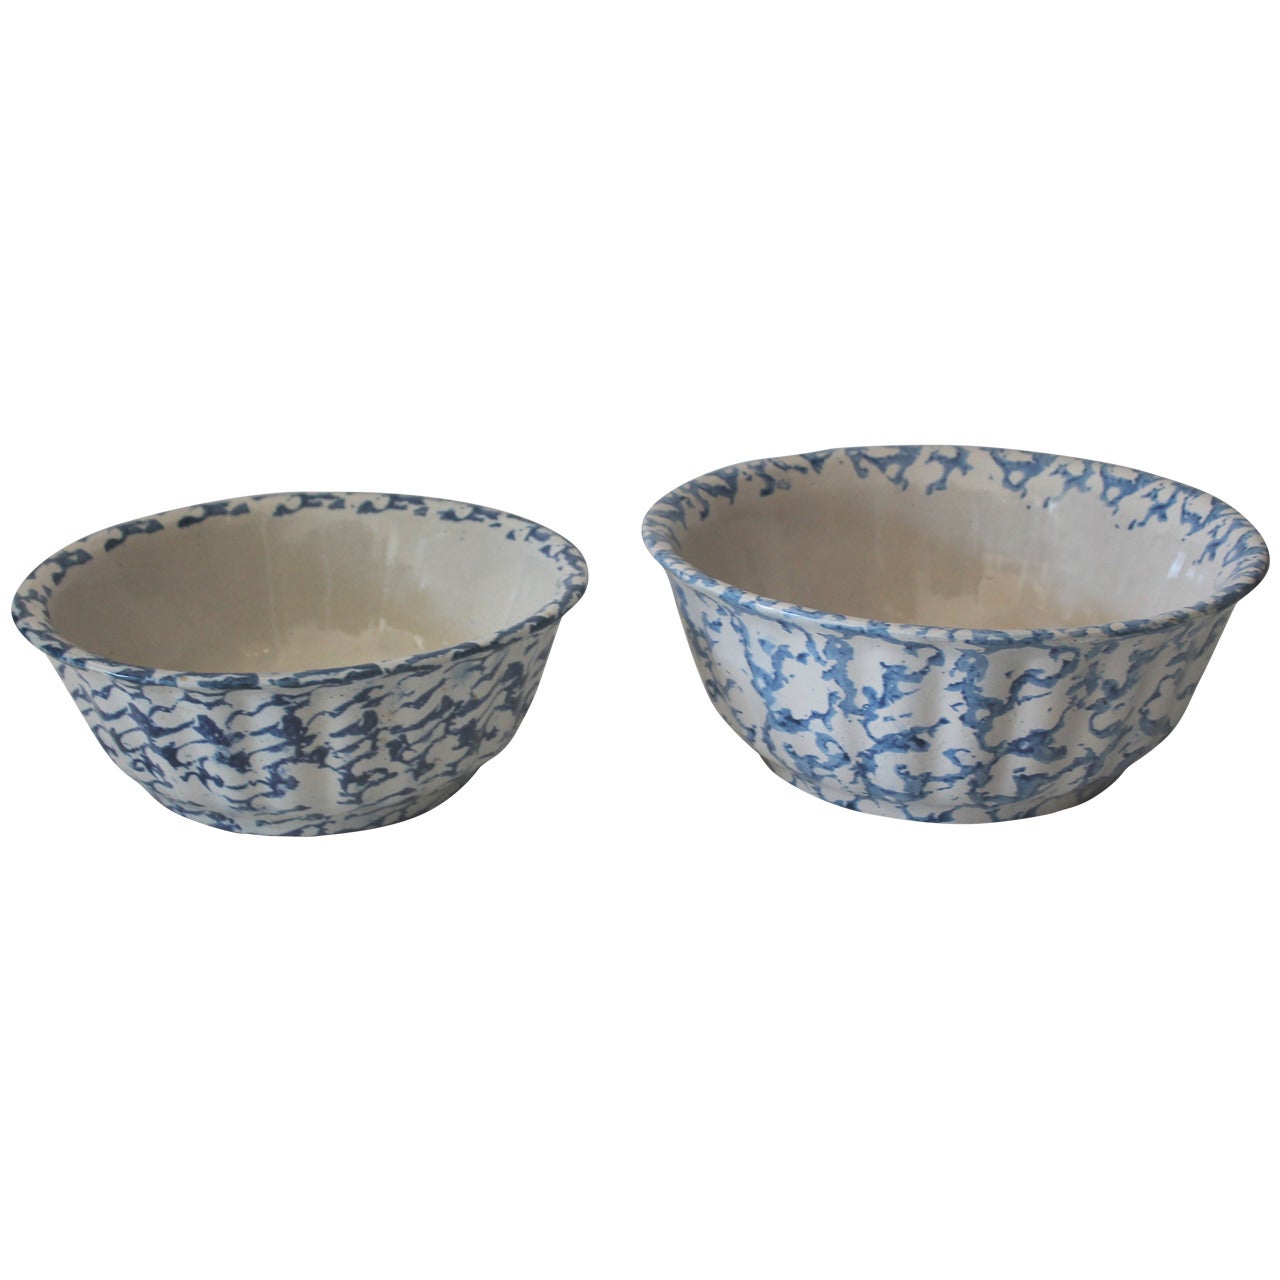 Pair of Large 19th Century Spongeware Pottery Serving Bowls For Sale